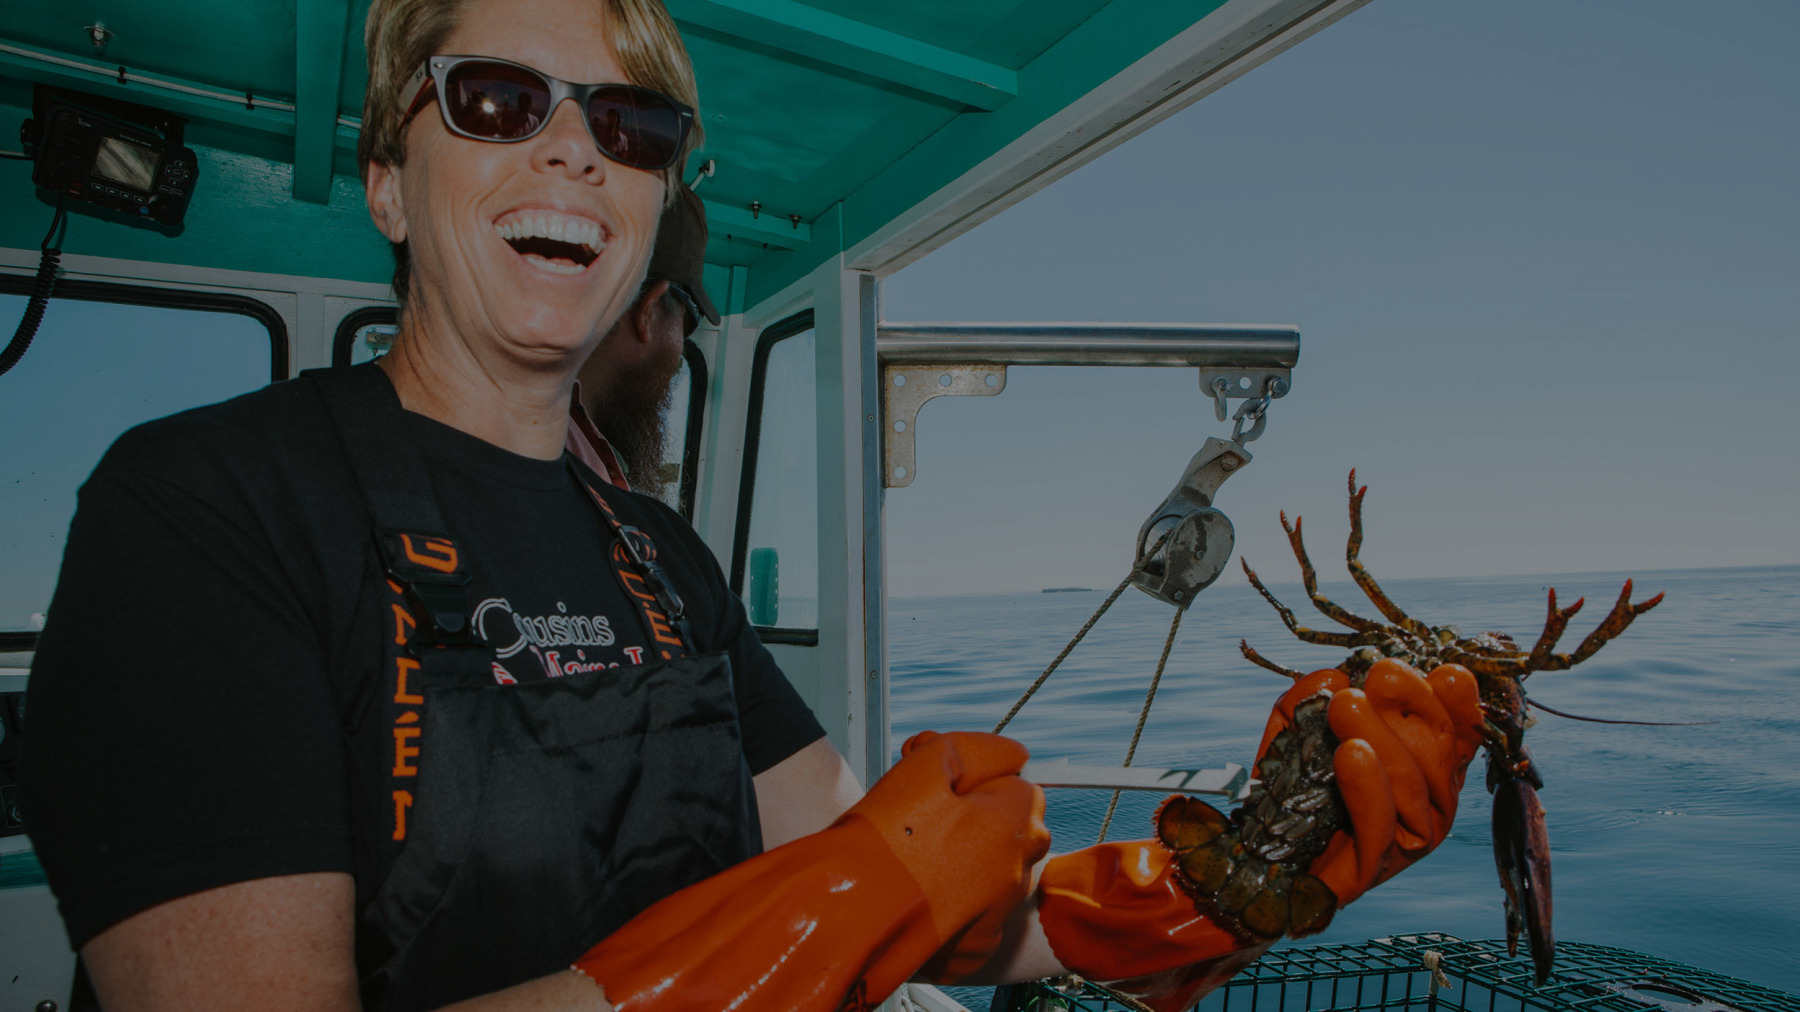 Cousins Maine Lobster Columbus franchise owner holding a lobster on a lobster boat in Maine.